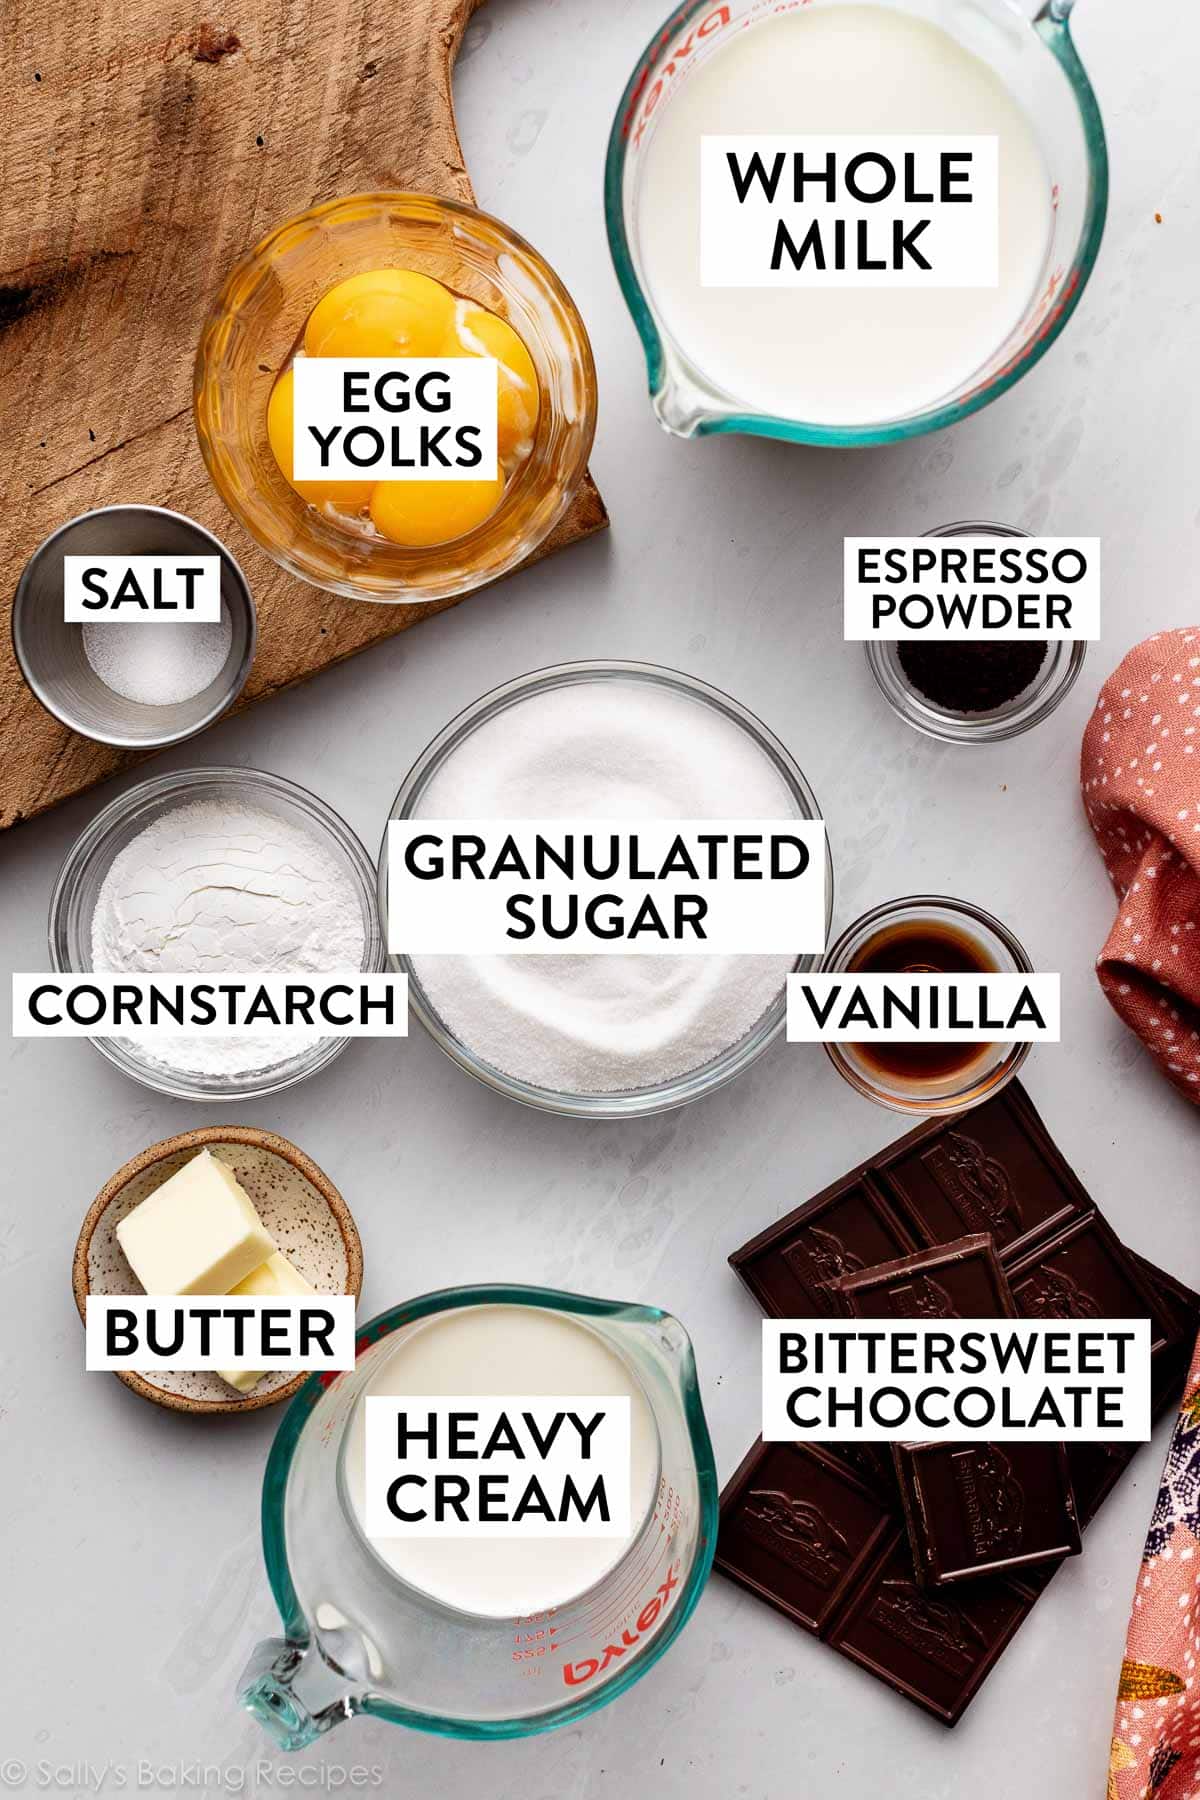 ingredients in bowls on counter including egg yolks, whole milk, chocolate, heavy cream, butter, cornstarch, and sugar.